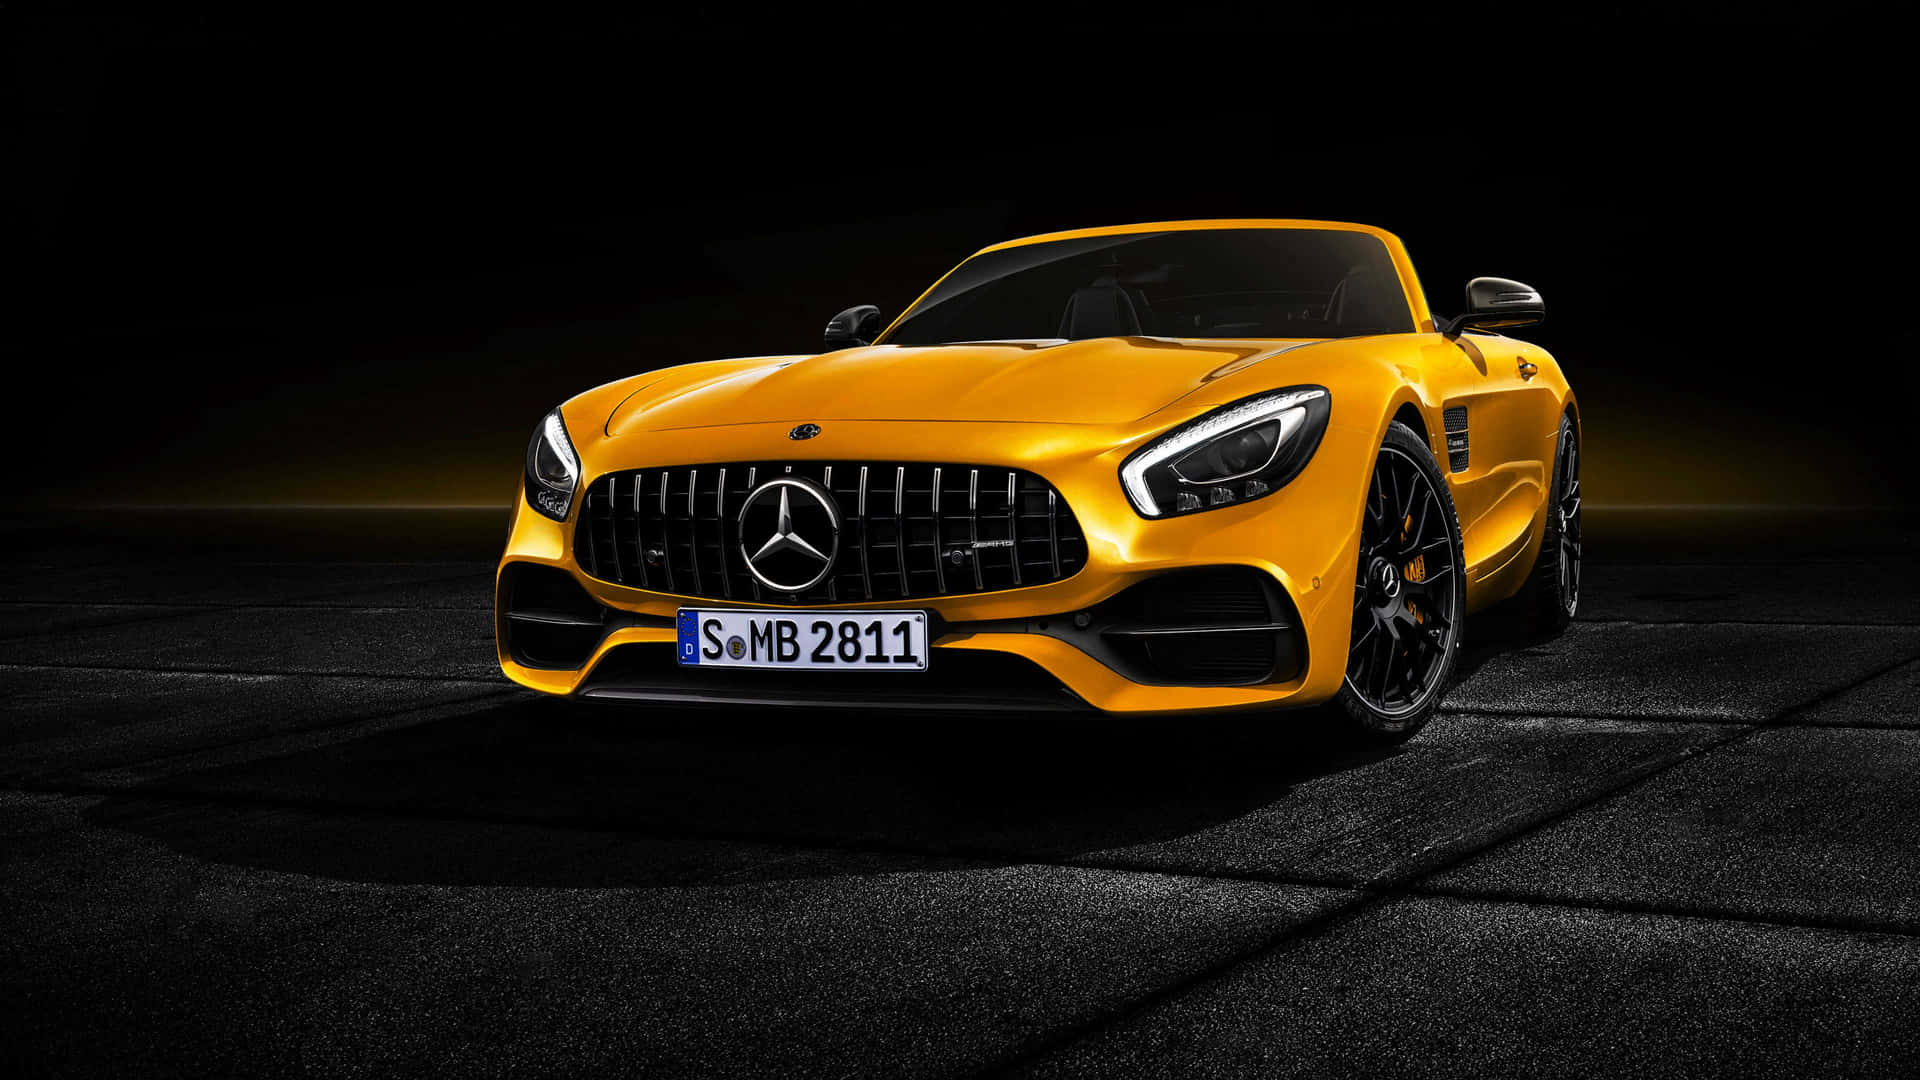 Discover the power and beauty of Mercedes AMG GT. Wallpaper